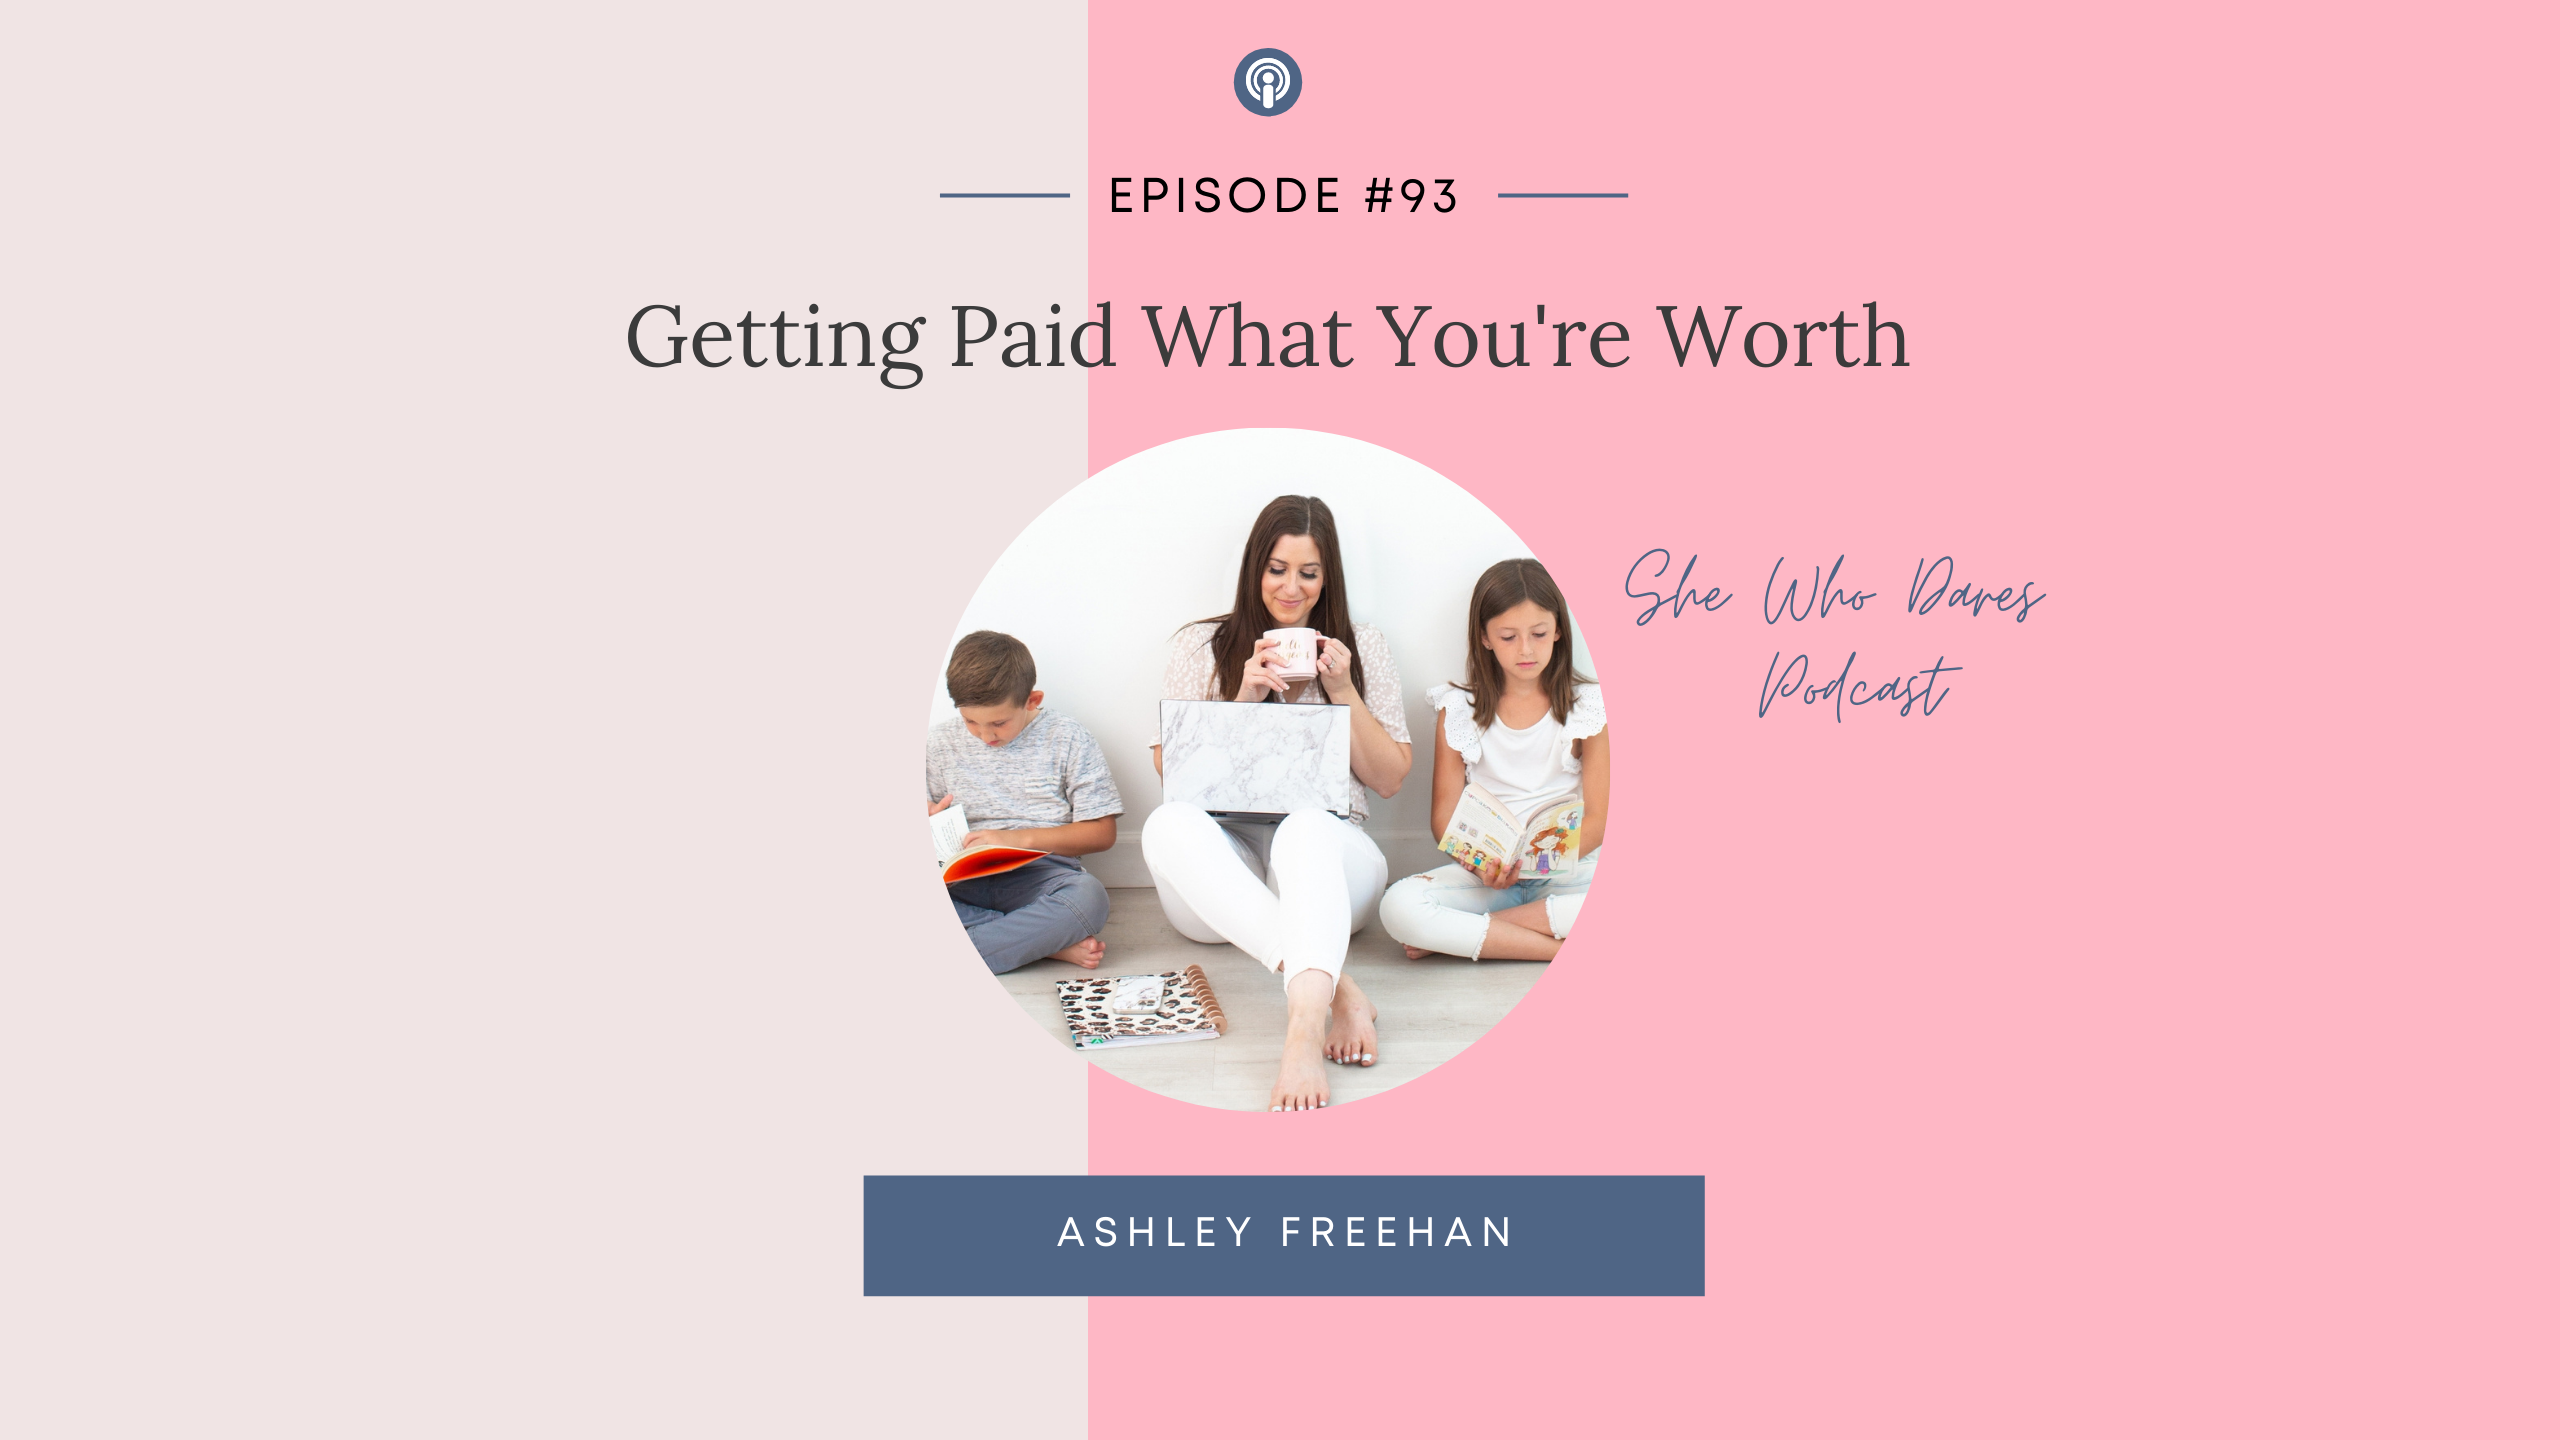 Getting Paid What You're Worth